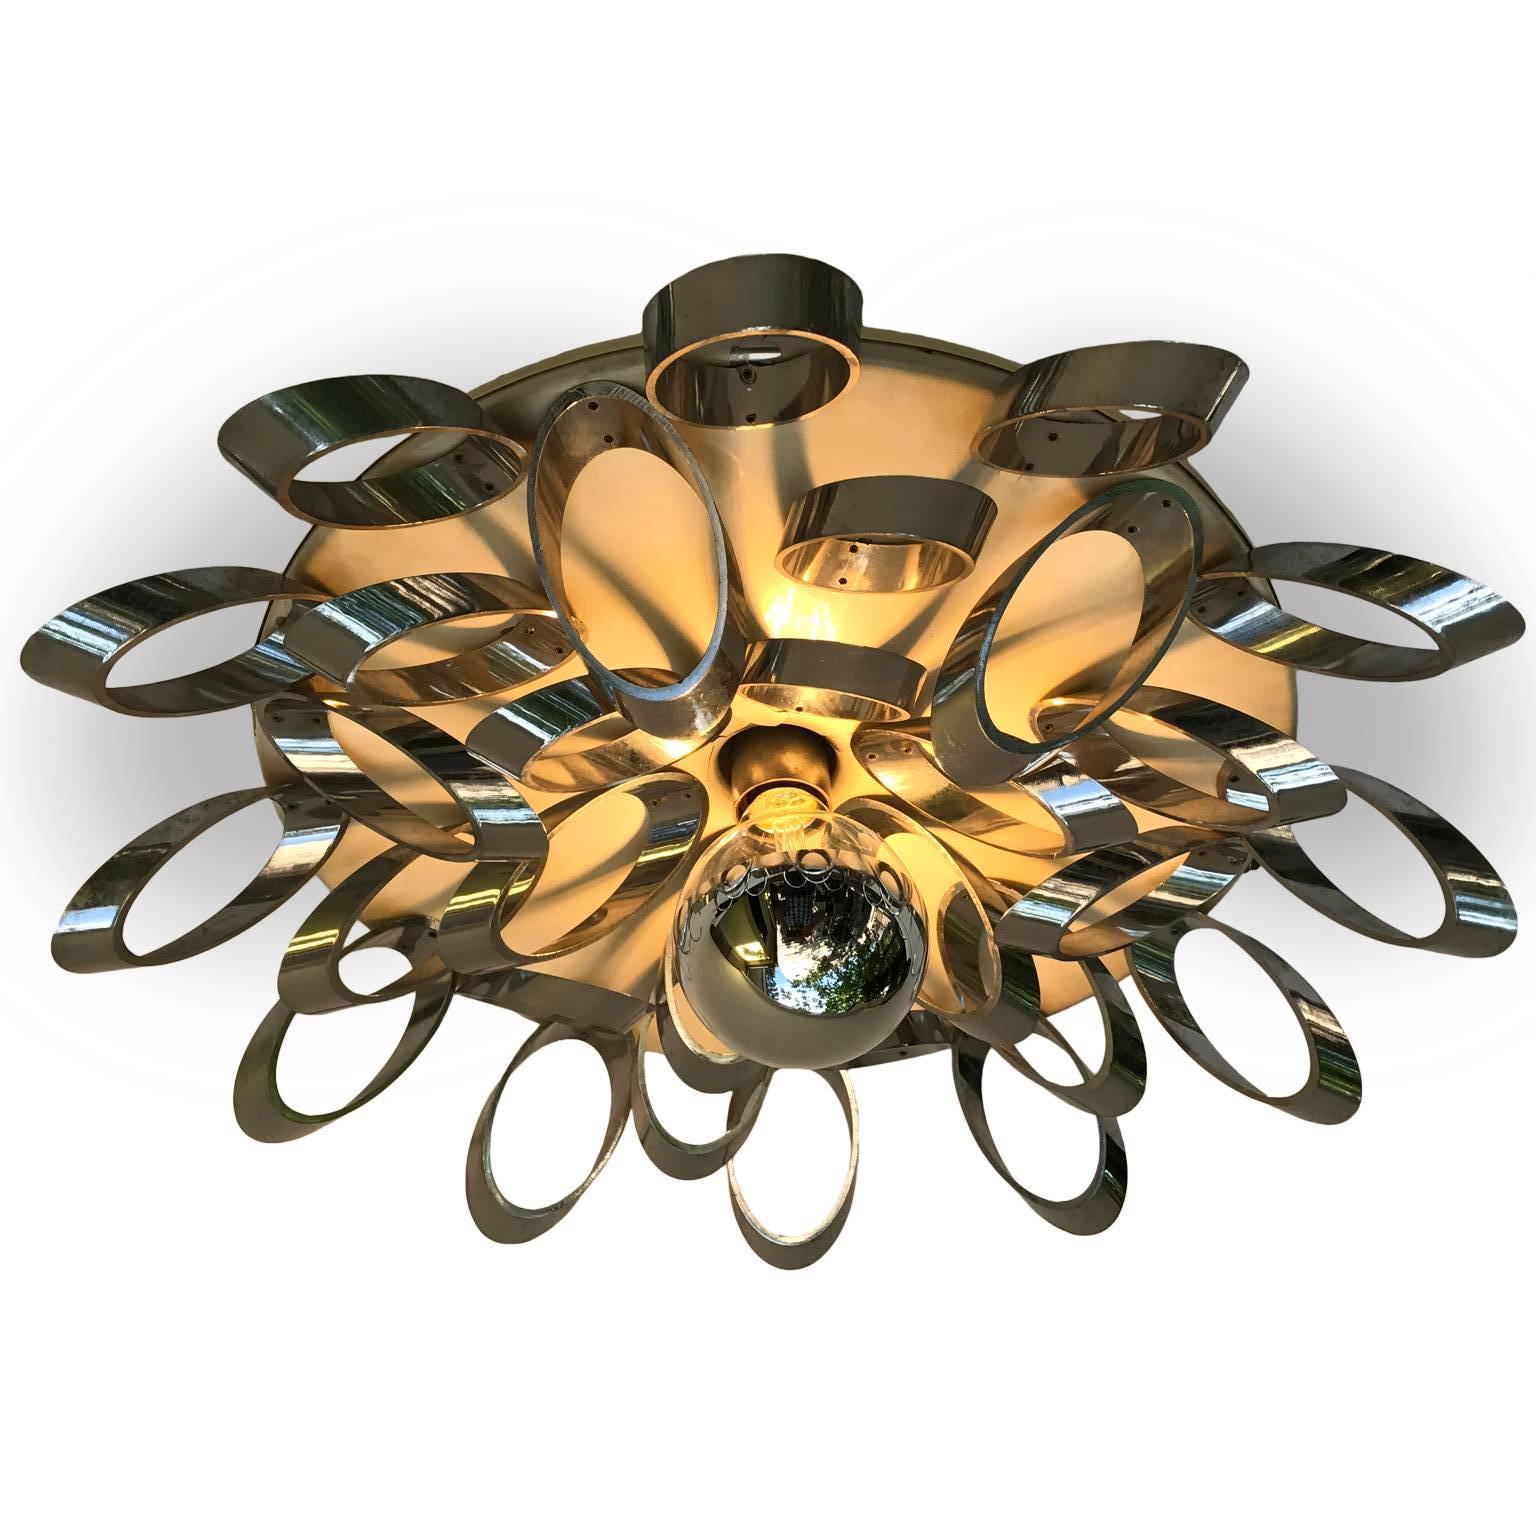 This unique and original Italian, one-light ceiling fixture, designed and handmade by a Milanese architect, circa 1970s, probably inspired by Gaetano Sciolari's creations.

This unusual ceiling light consists of a circular ivory painted metal disk,